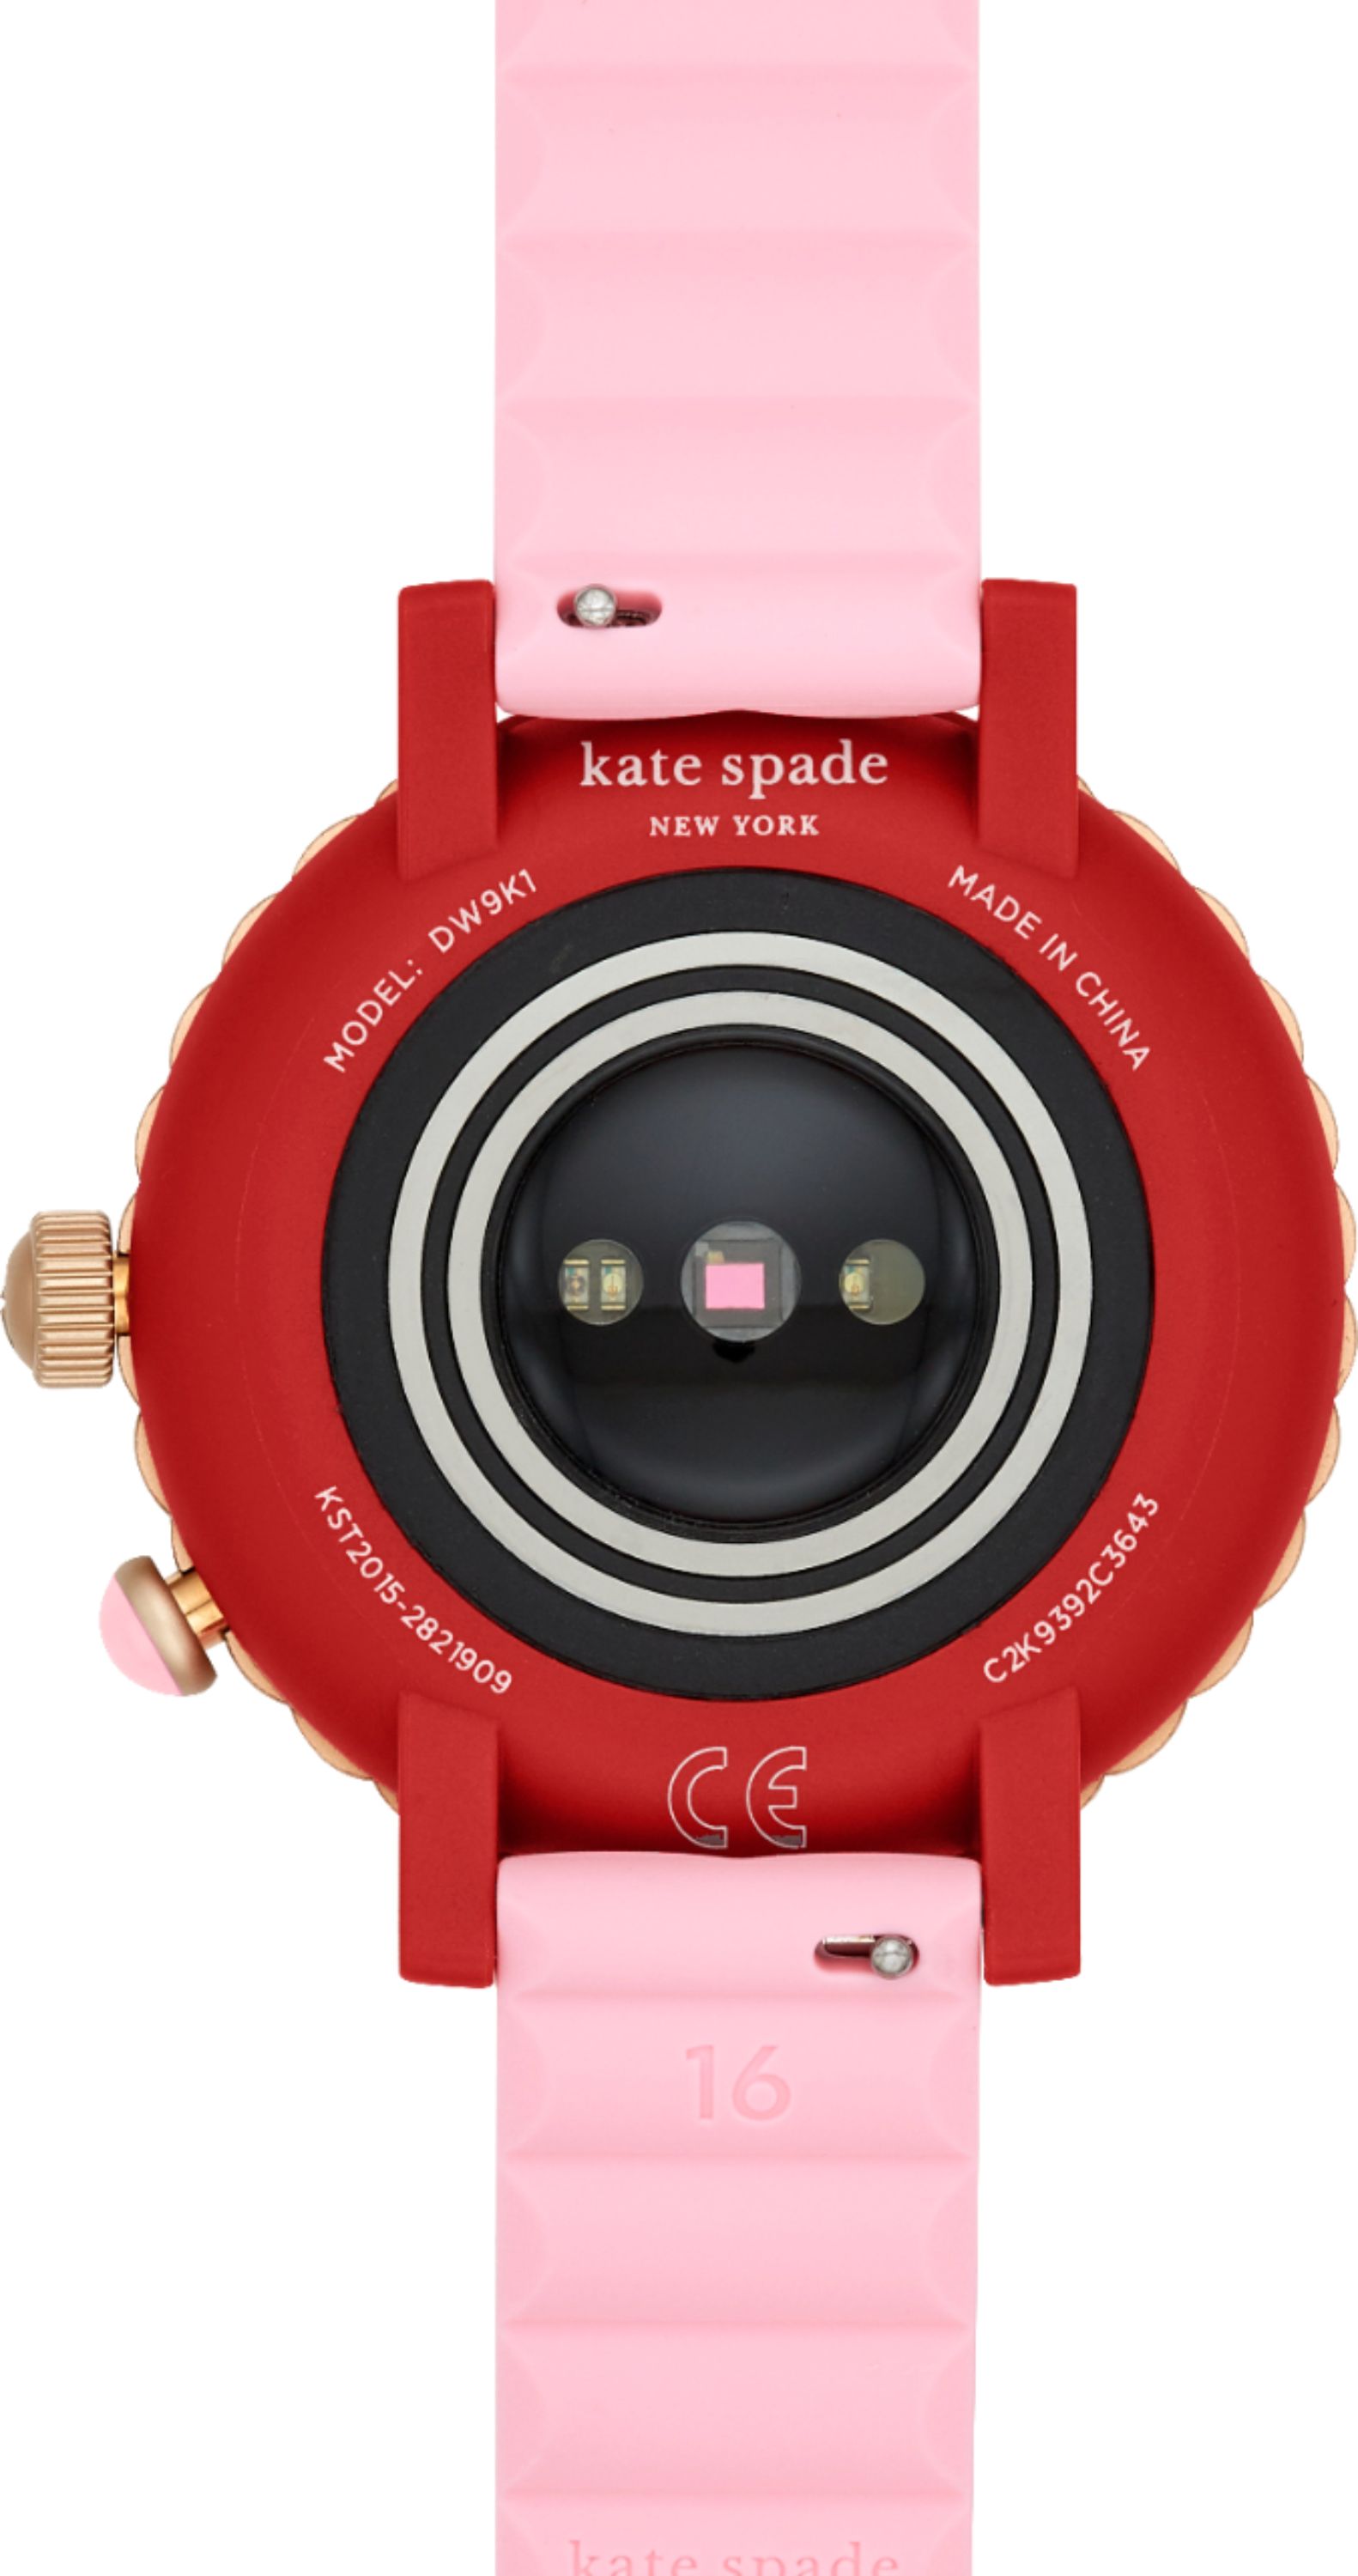 Back View: kate spade new york - Sport Smartwatch - Pink Silicone